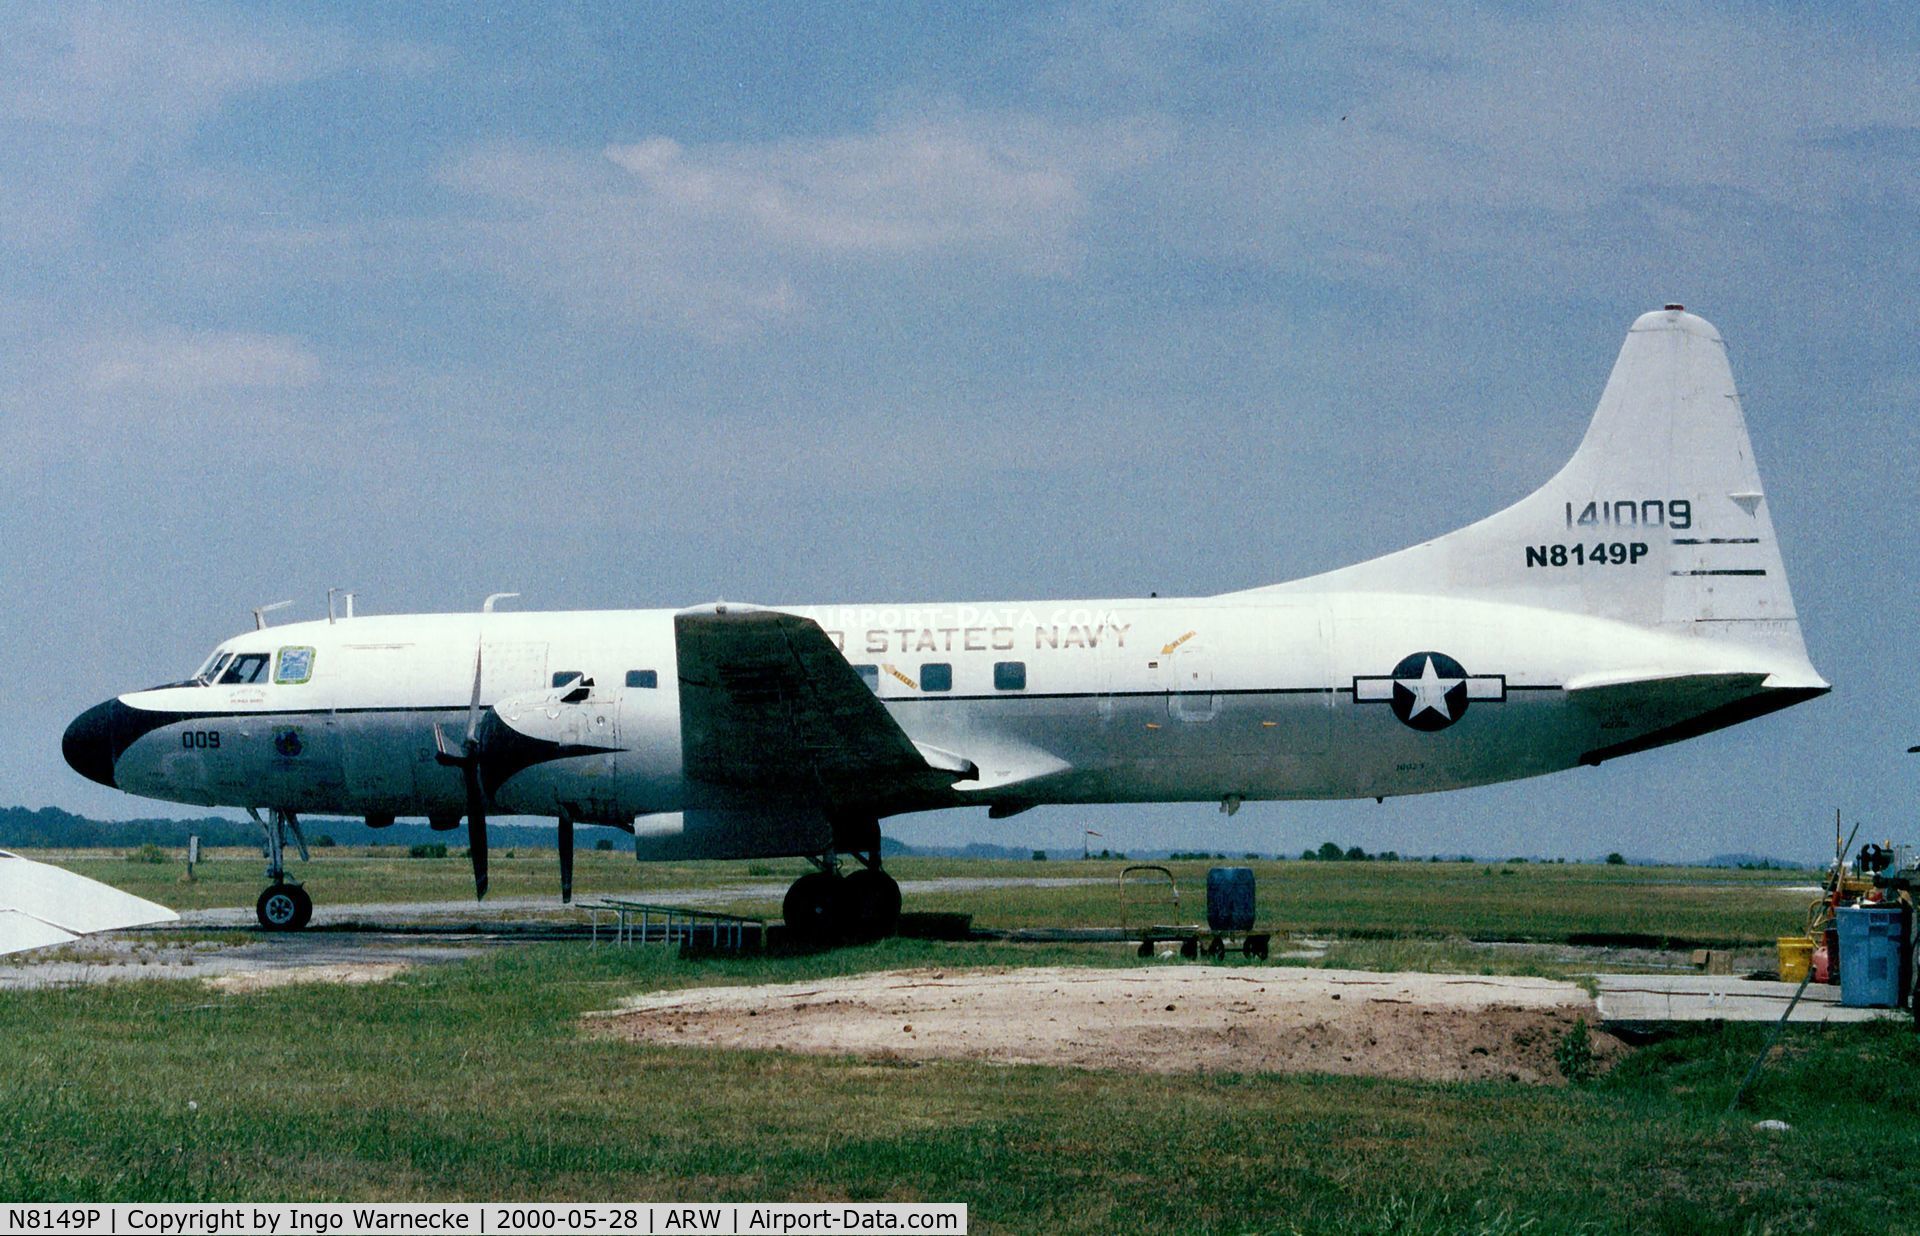 N8149P, Convair C-131F (R4Y-1) Samaritan C/N 292, Convair C-131F (ex US Navy) at Beaufort County airport SC